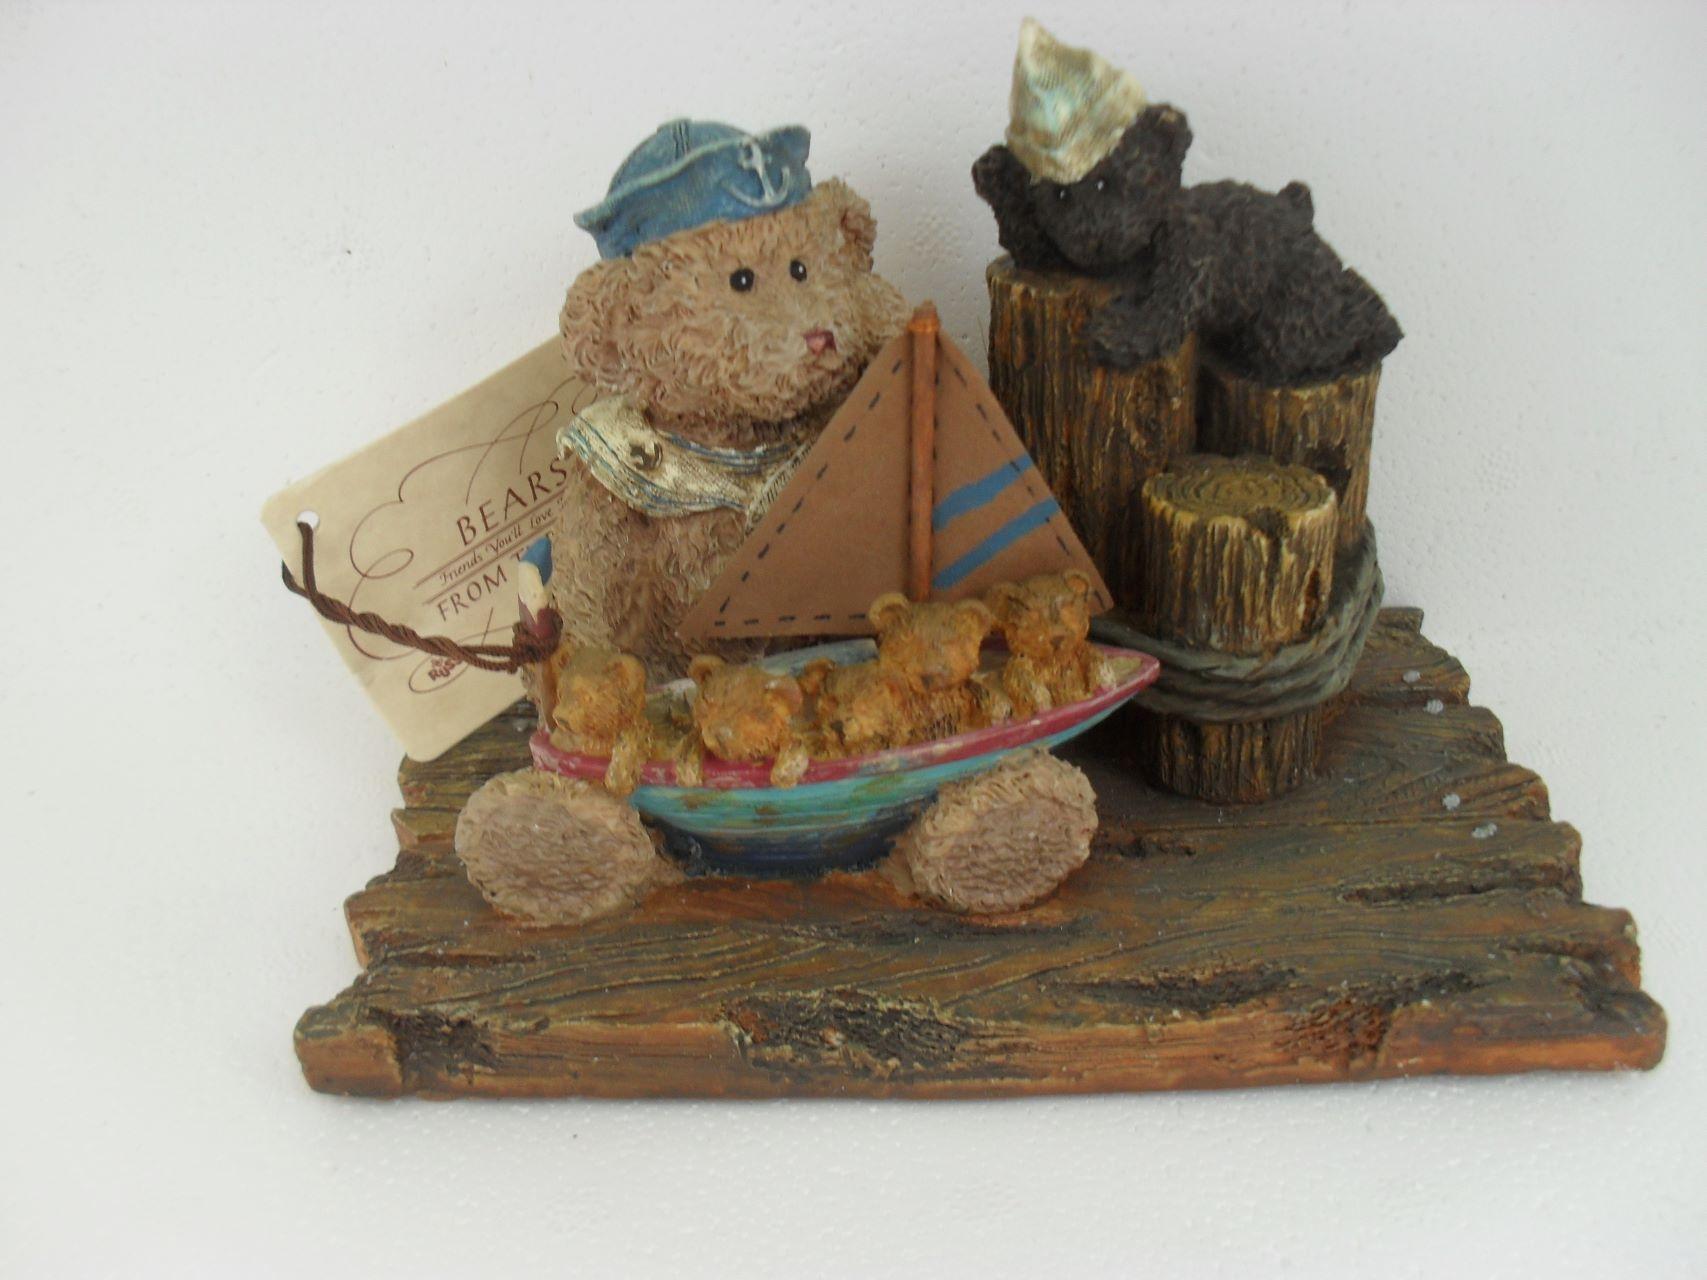 Russ  - Ships Ahoy  - Bears from the Past. Figurine